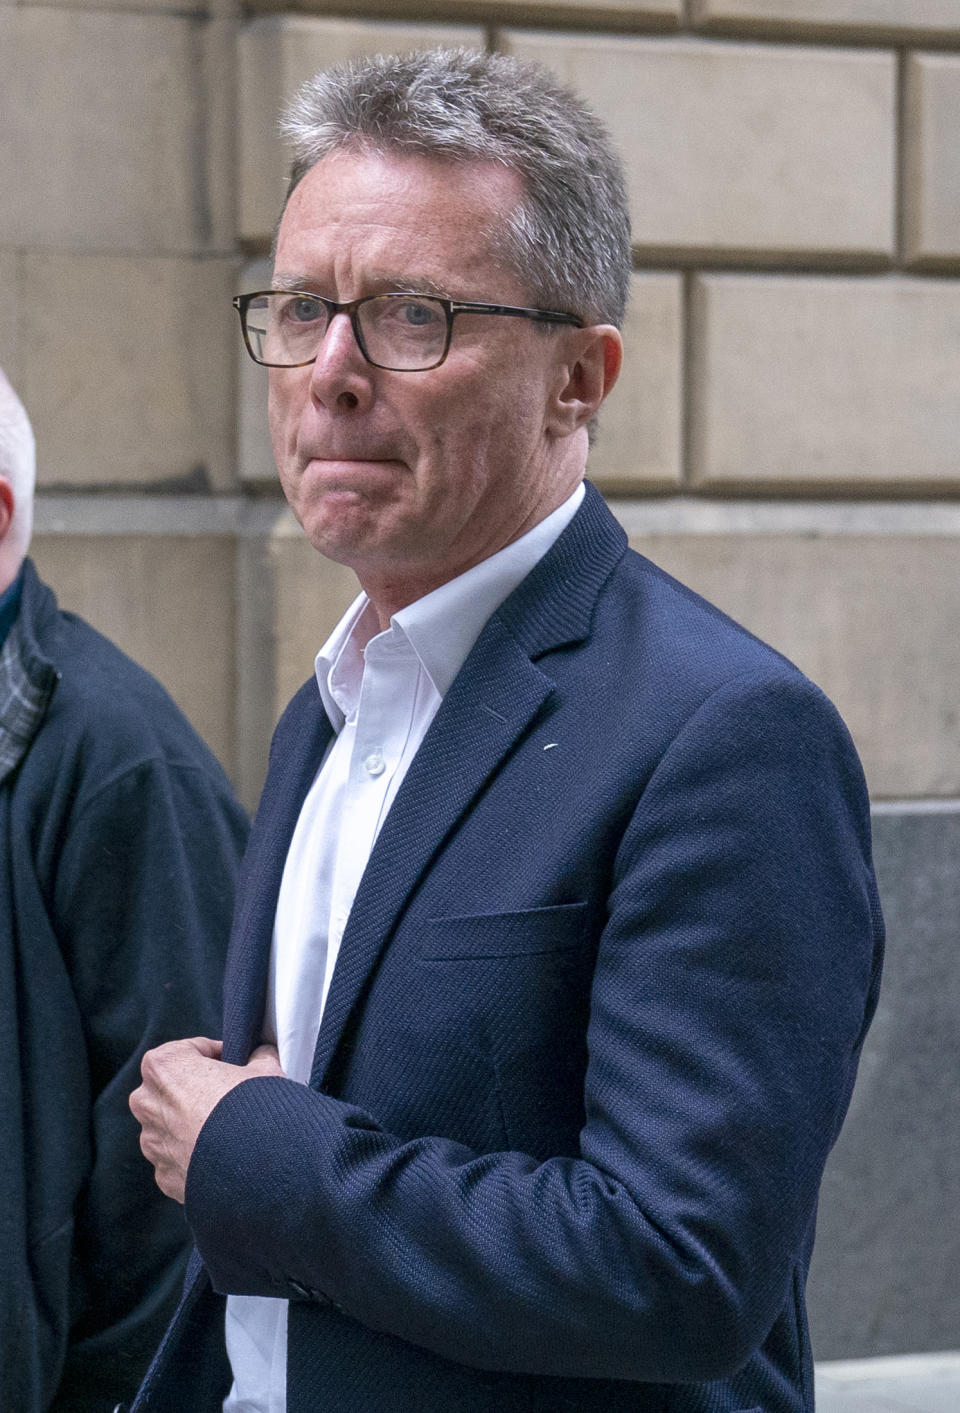 Broadcaster Nicky Campbell spoke about his experiences at Edinburgh Academy at the Scottish Child Abuse Inquiry last year (Jane Barlow/PA)